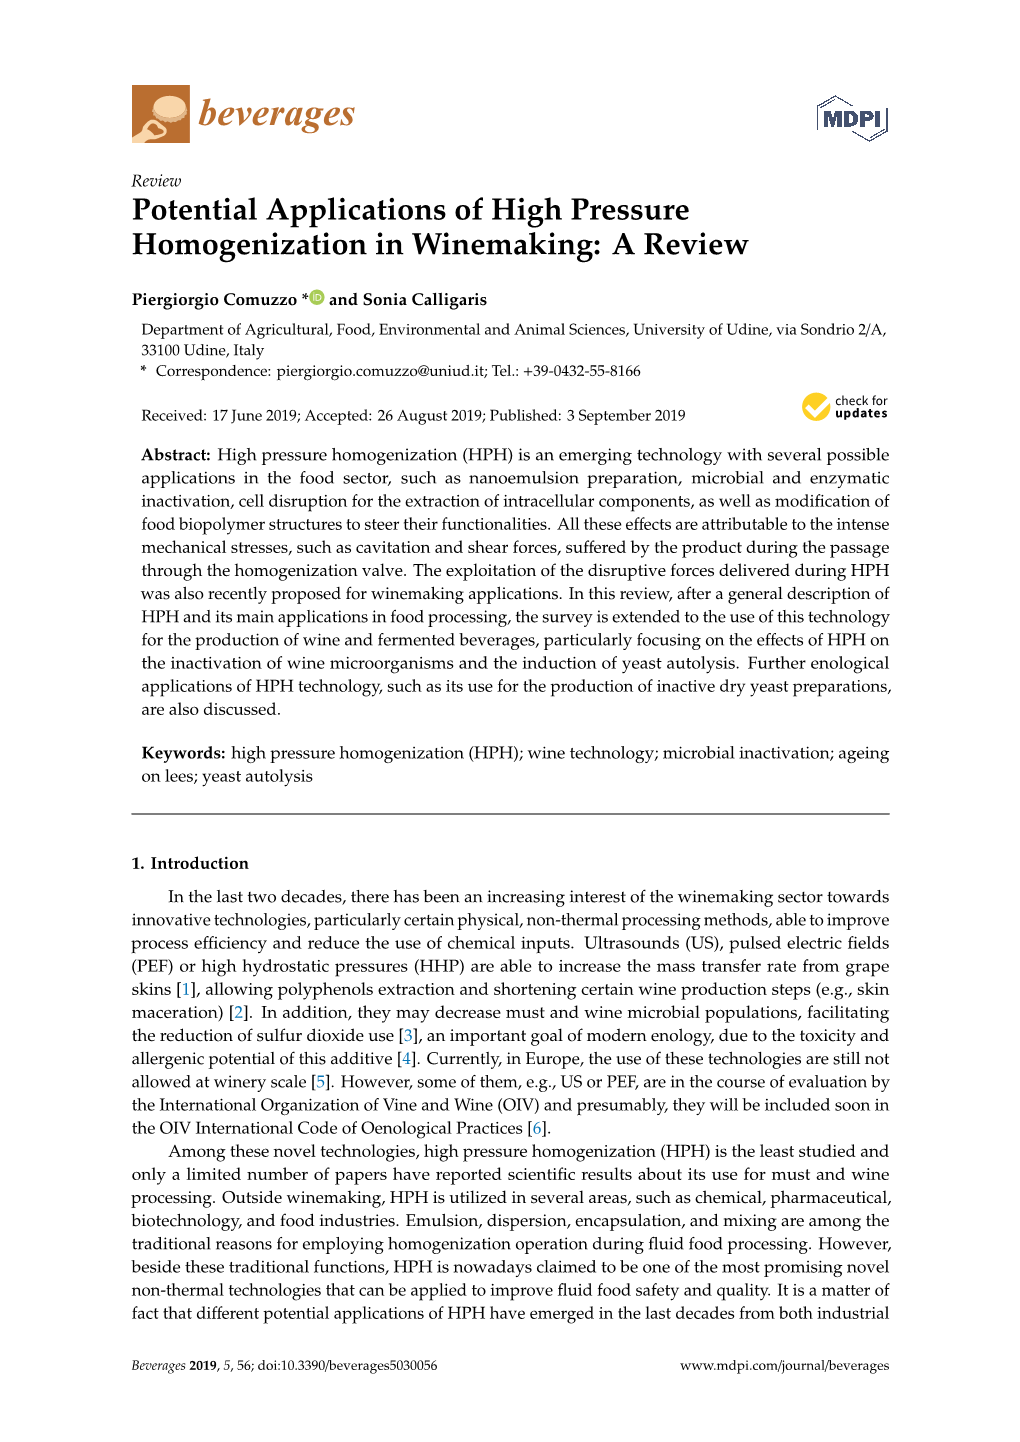 Potential Applications of High Pressure Homogenization in Winemaking: a Review